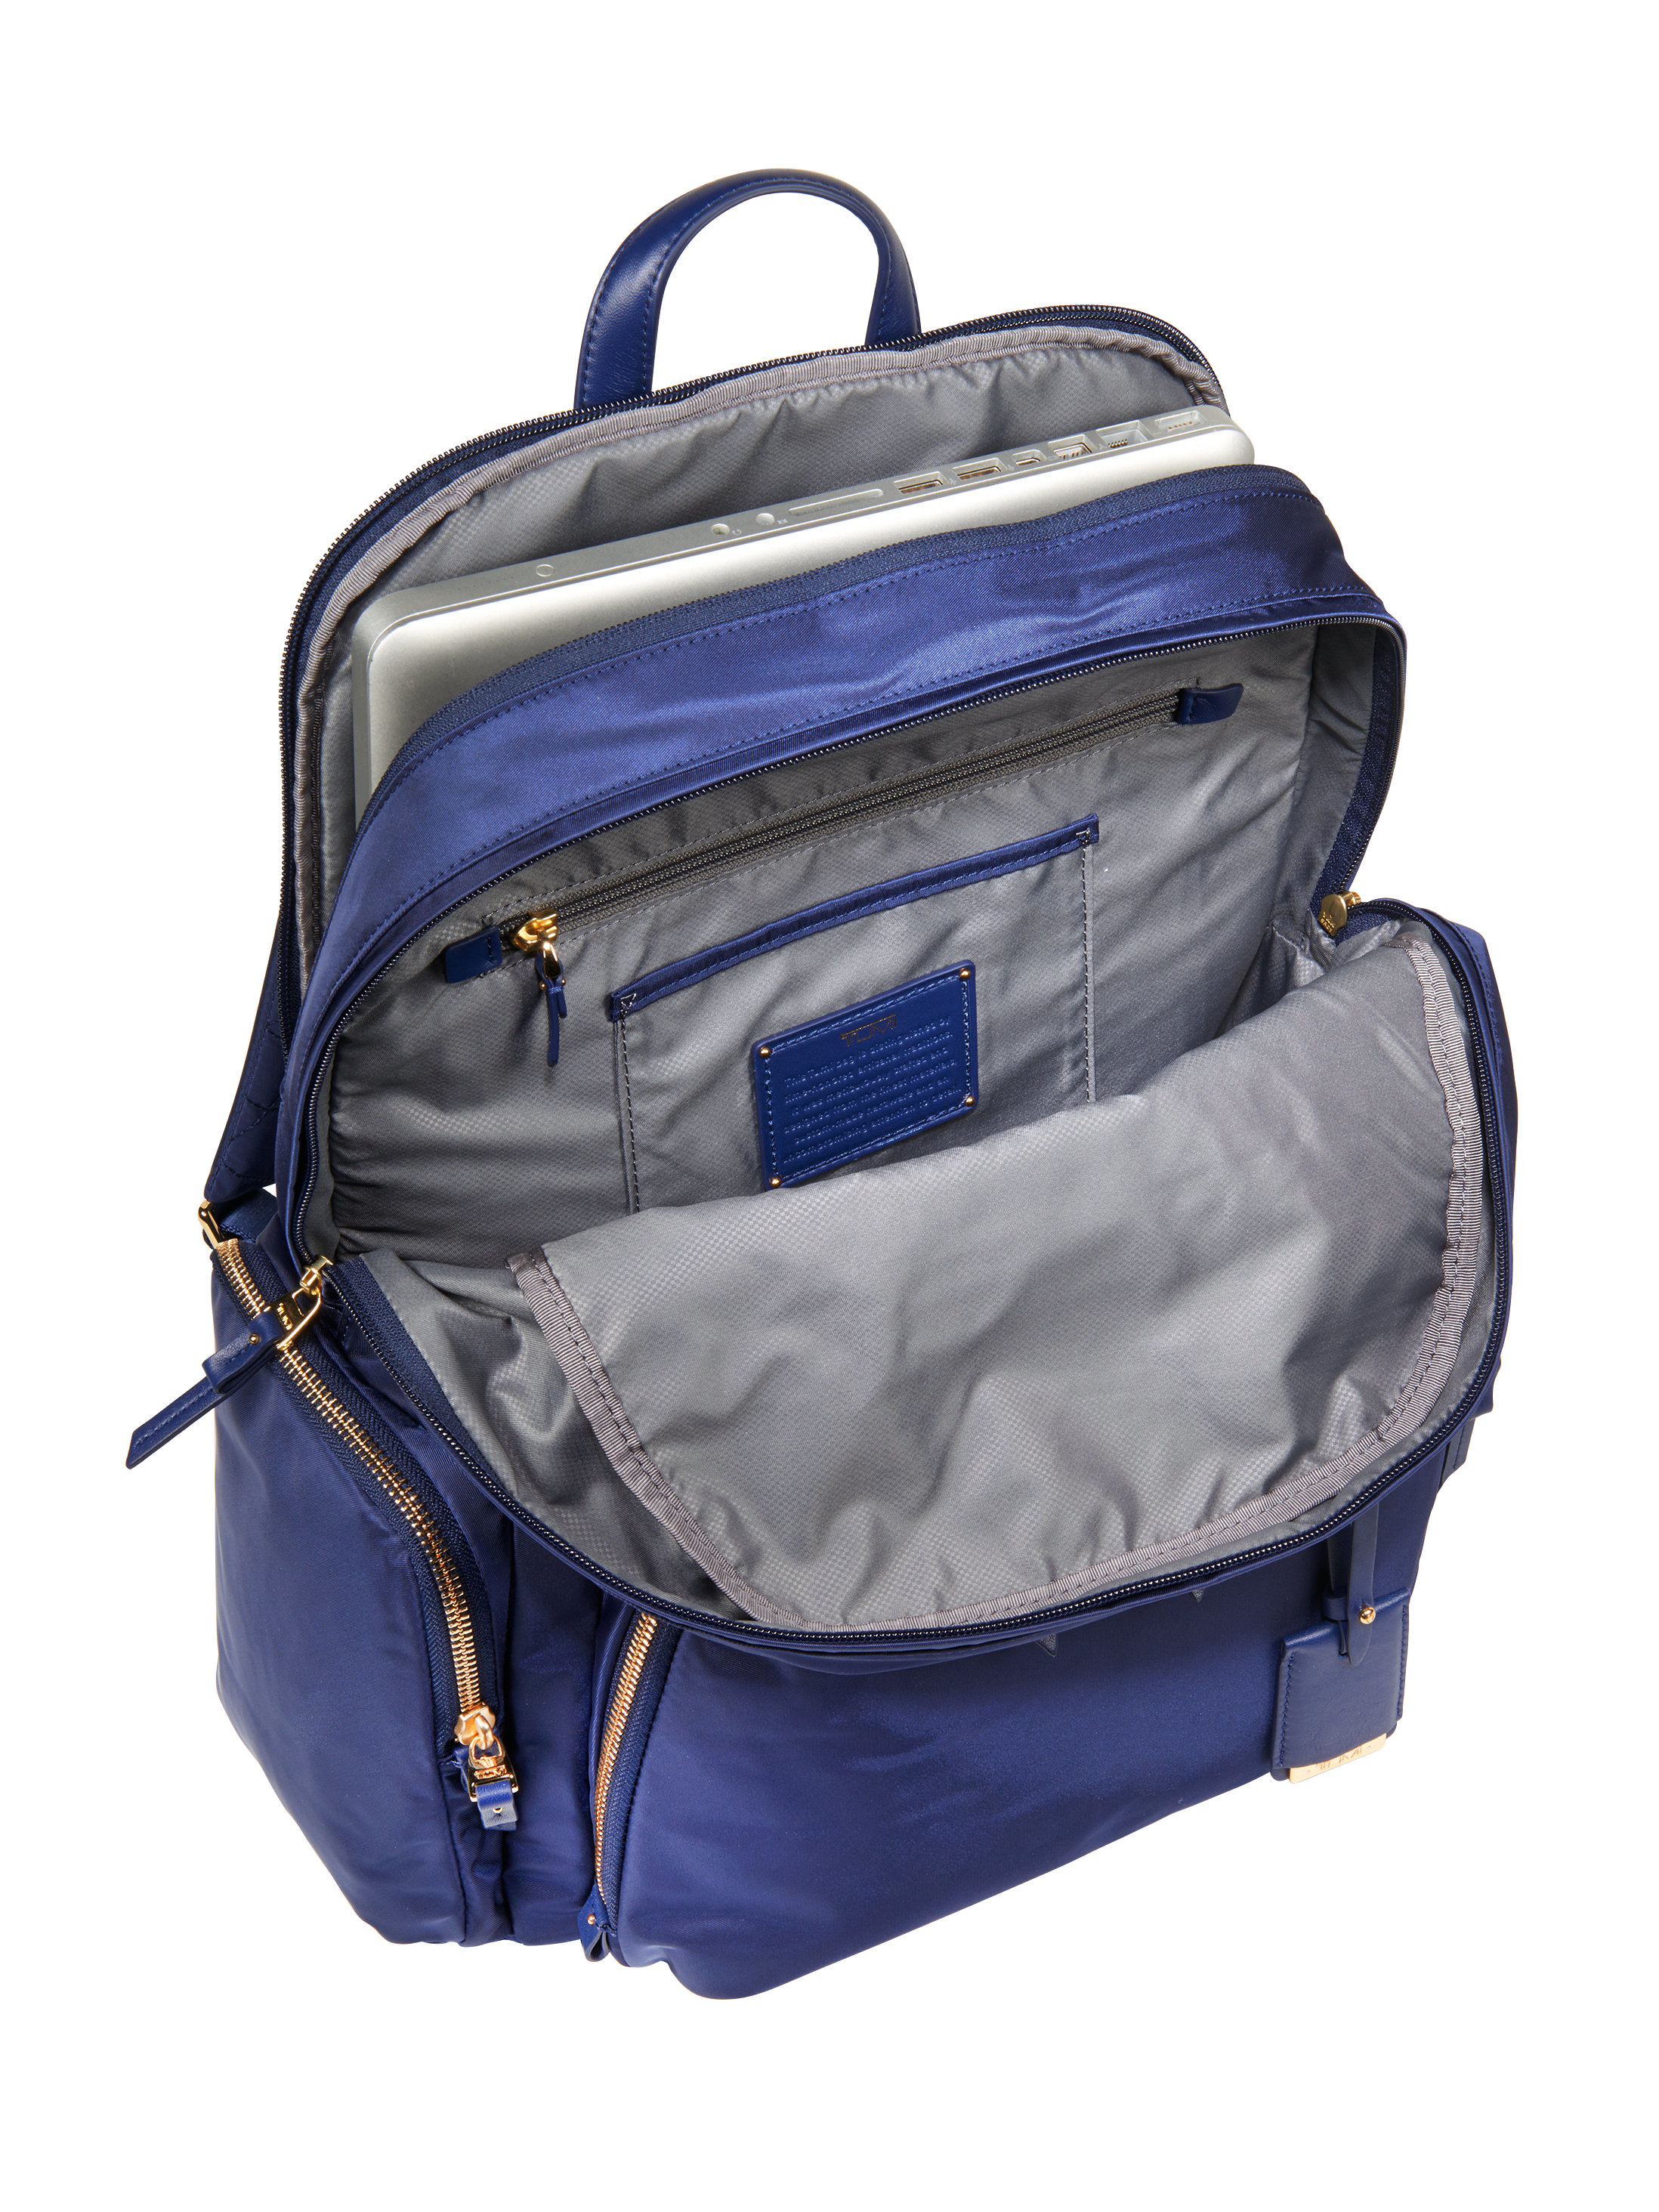 Lyst - Tumi Voyageur Calais Backpack in Purple for Men